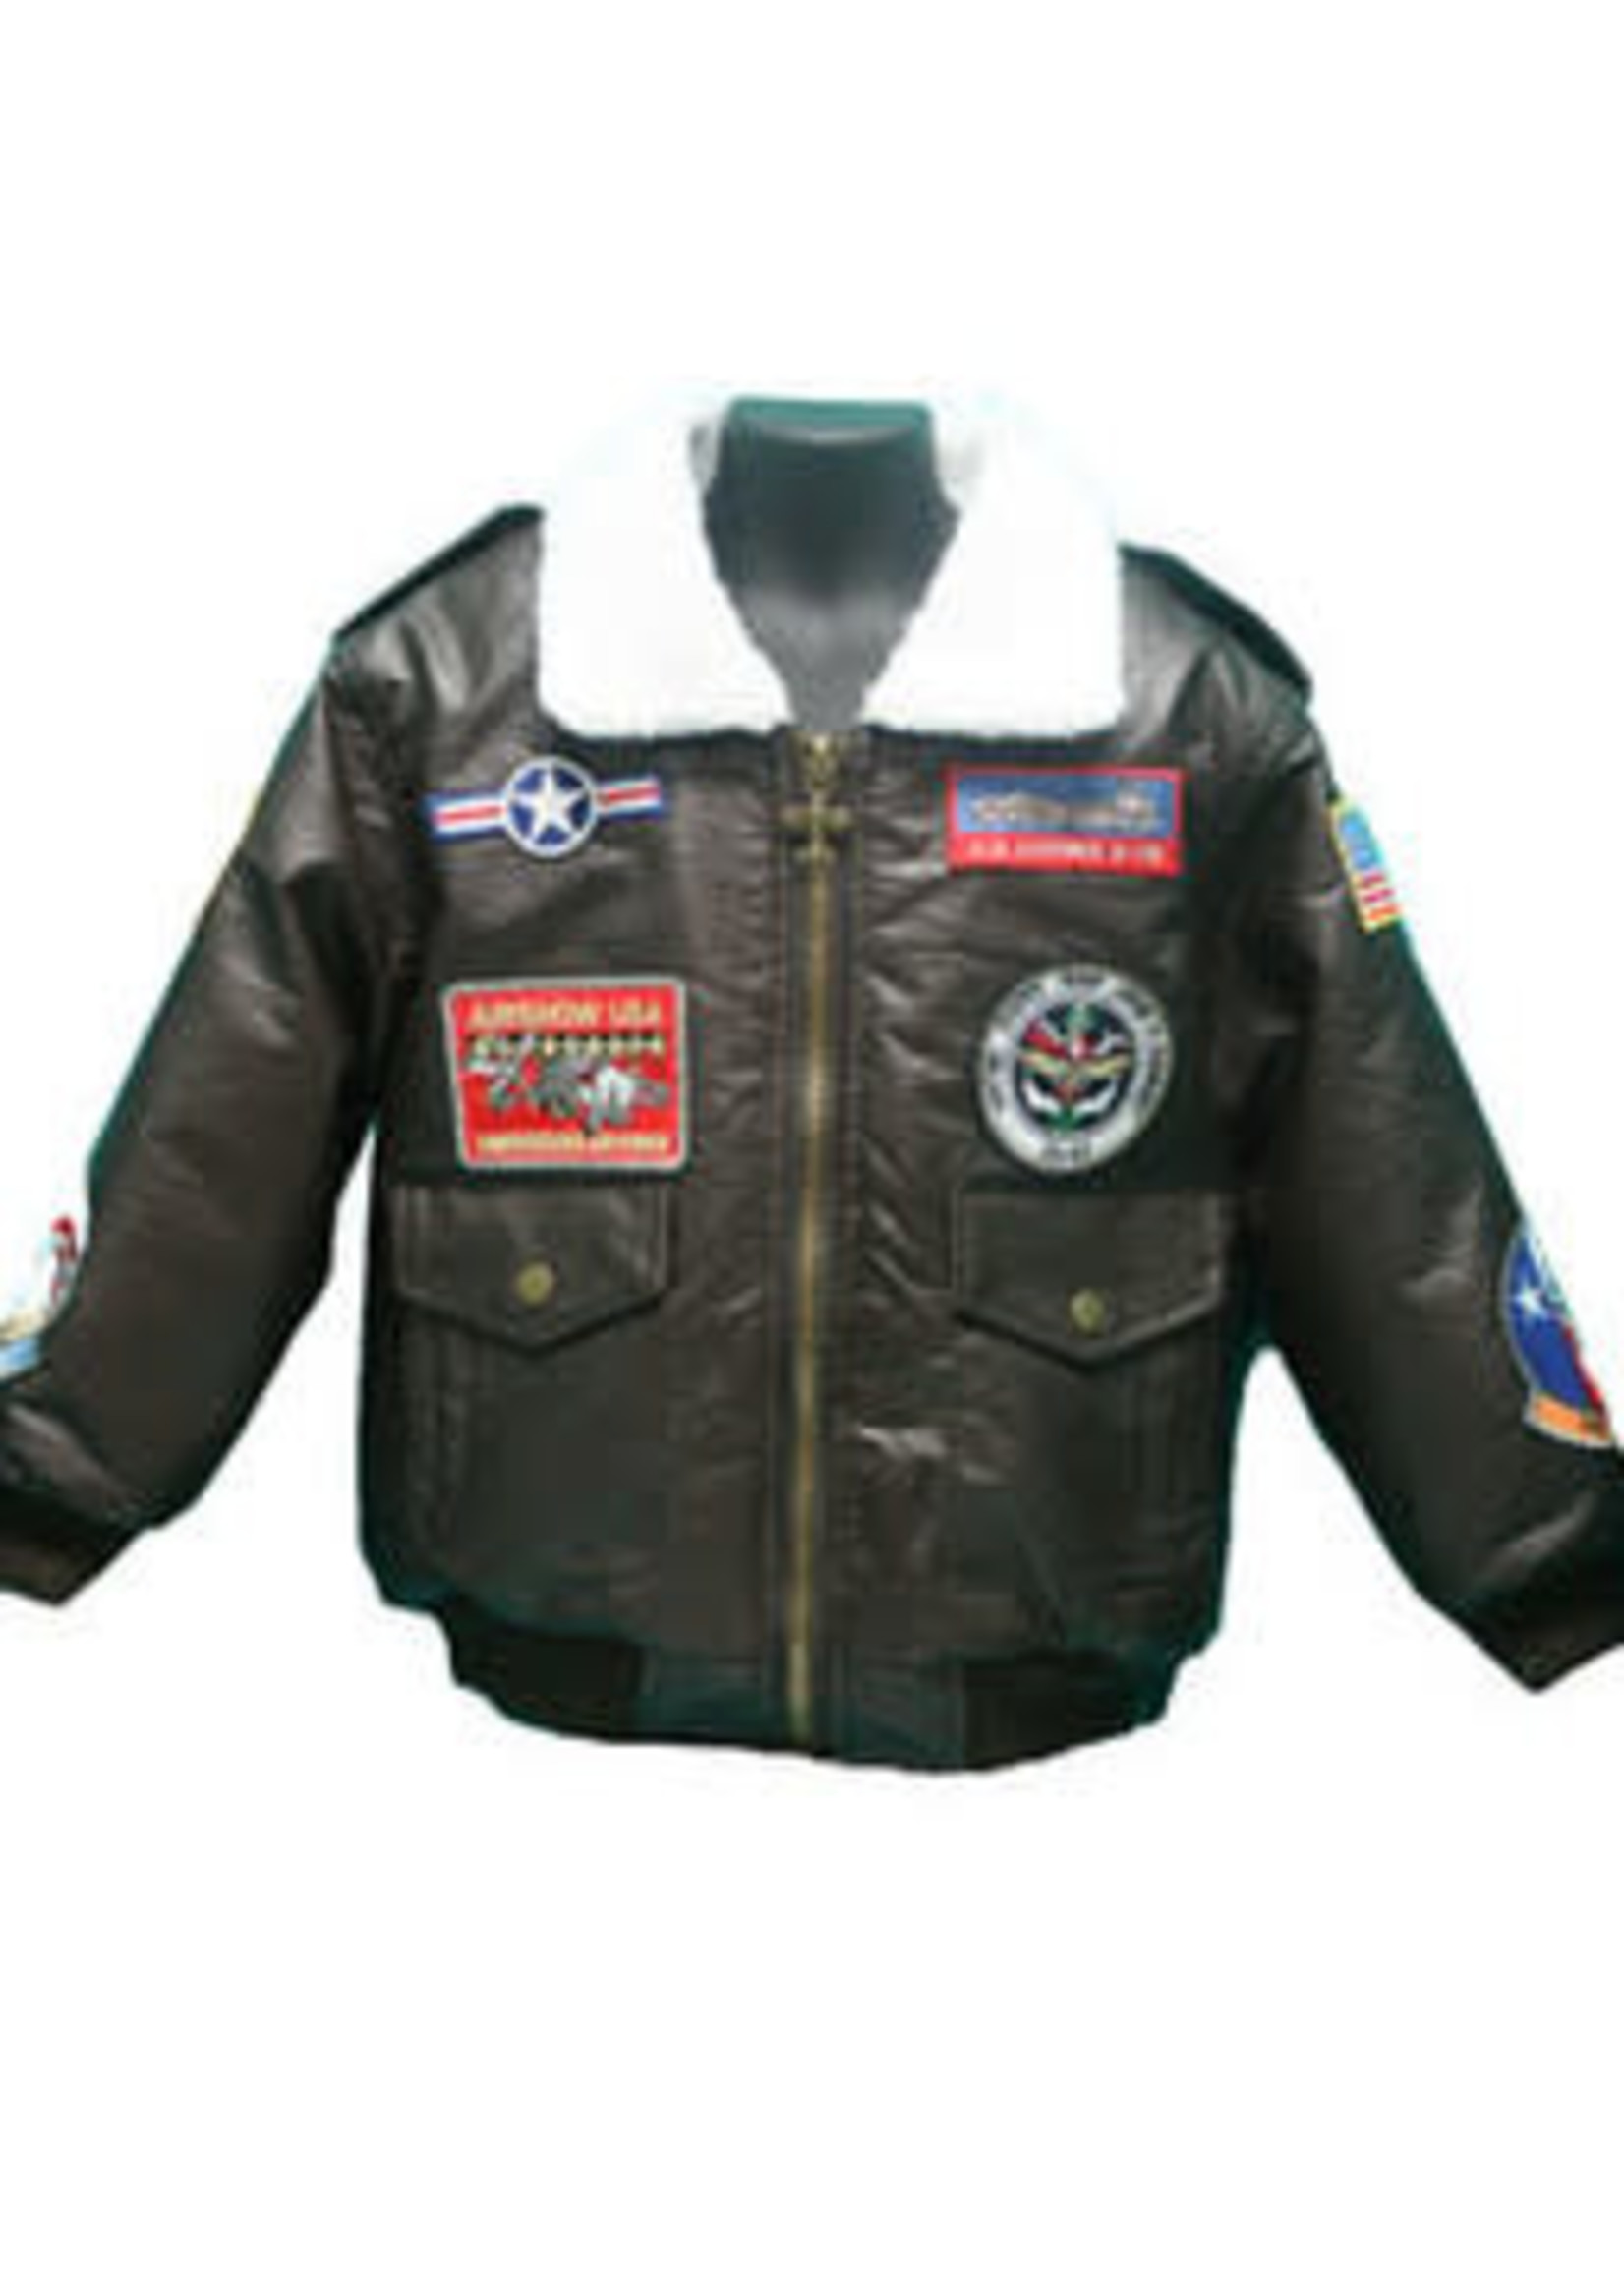 Up and Away Youth A-2 Bomber Jacket Size 14